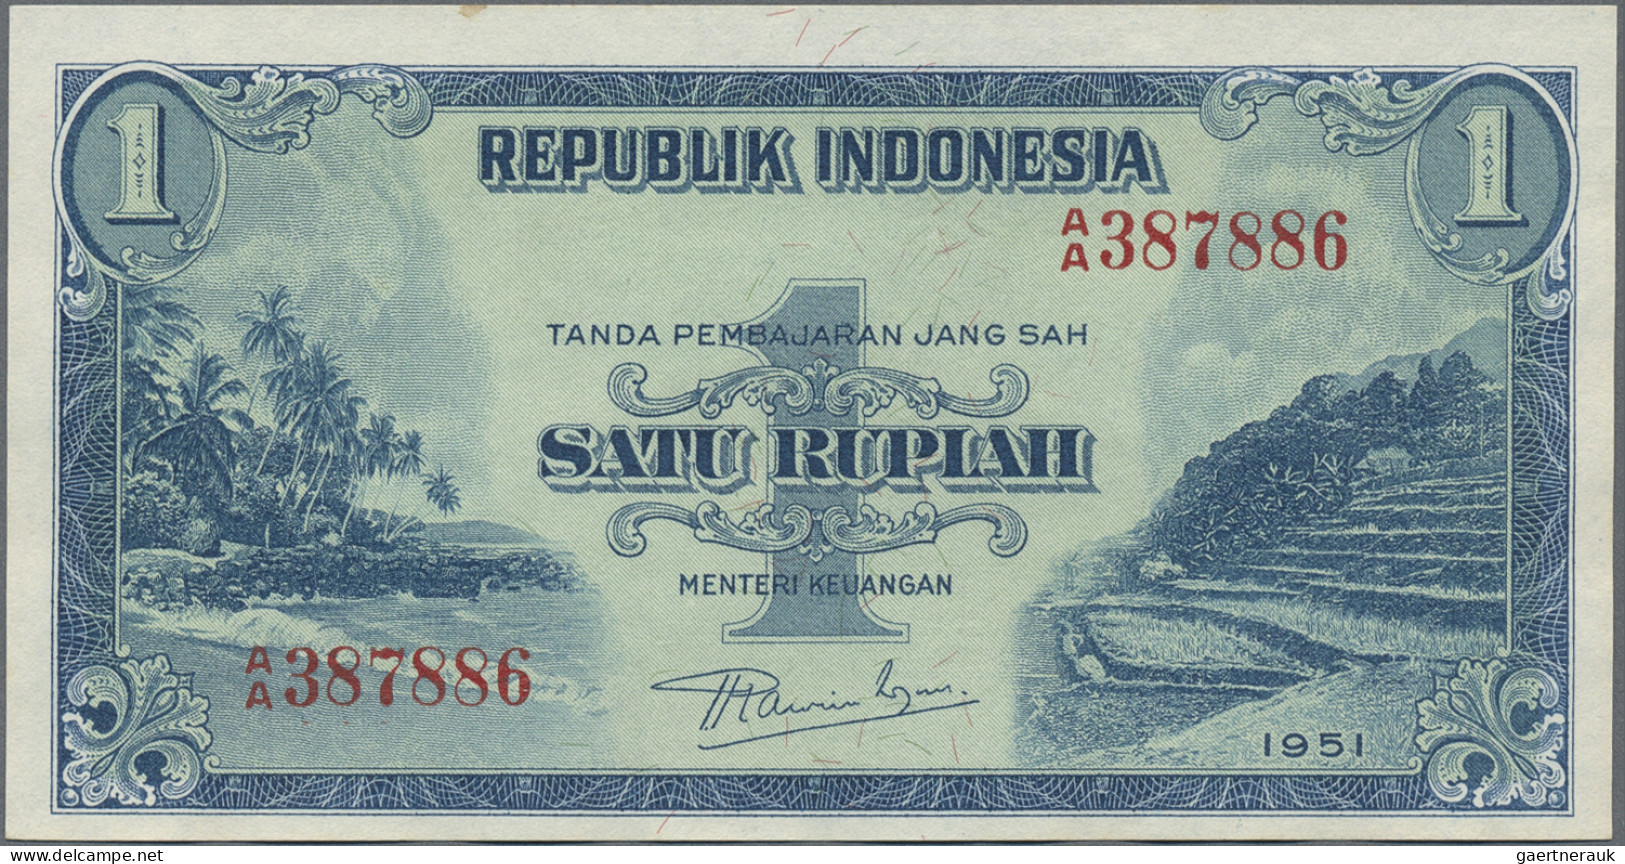 Indonesia: Republic Indonesia, Huge Lot With 17 Banknotes 1 And 2.5 Rupiah, Seri - Indonesia